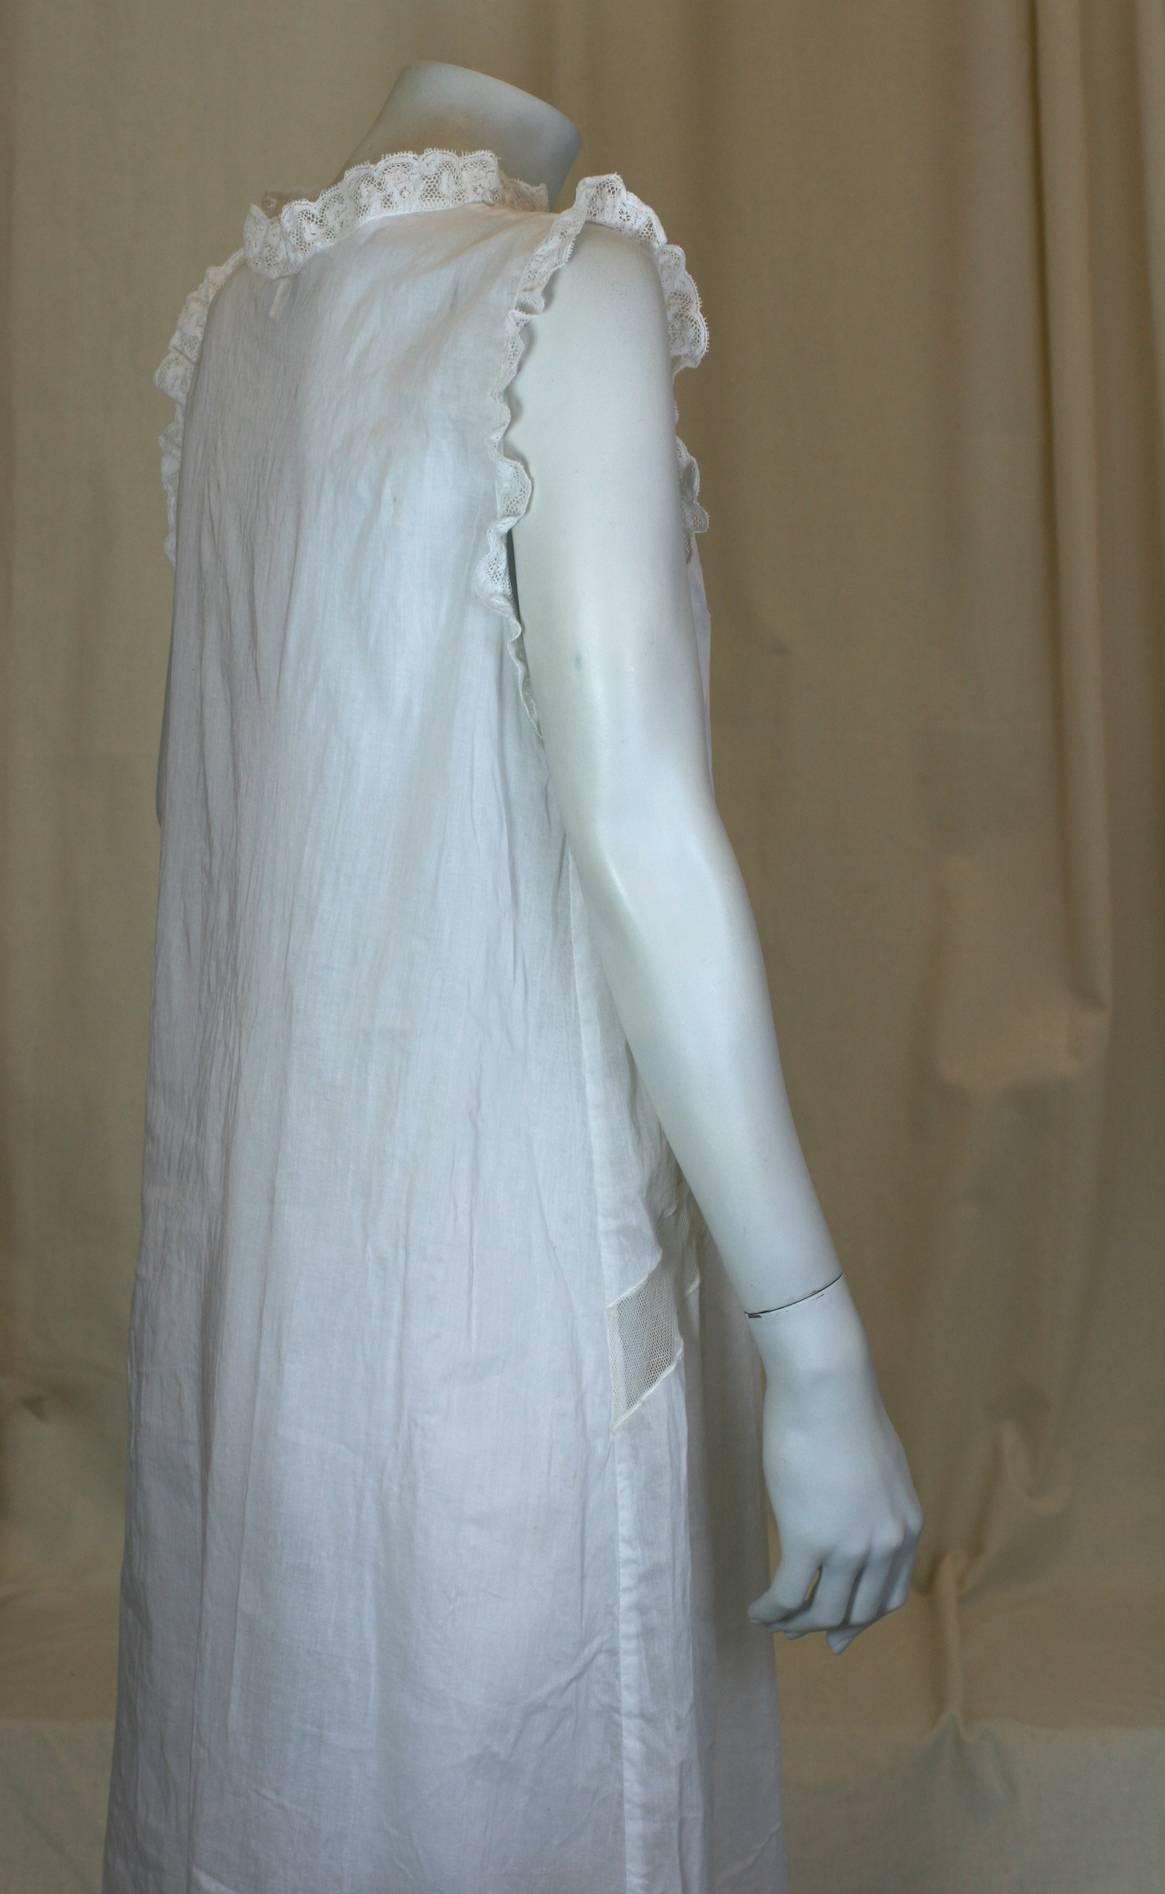 Tulle Inserted Lingerie Dress with Rose In Excellent Condition For Sale In New York, NY